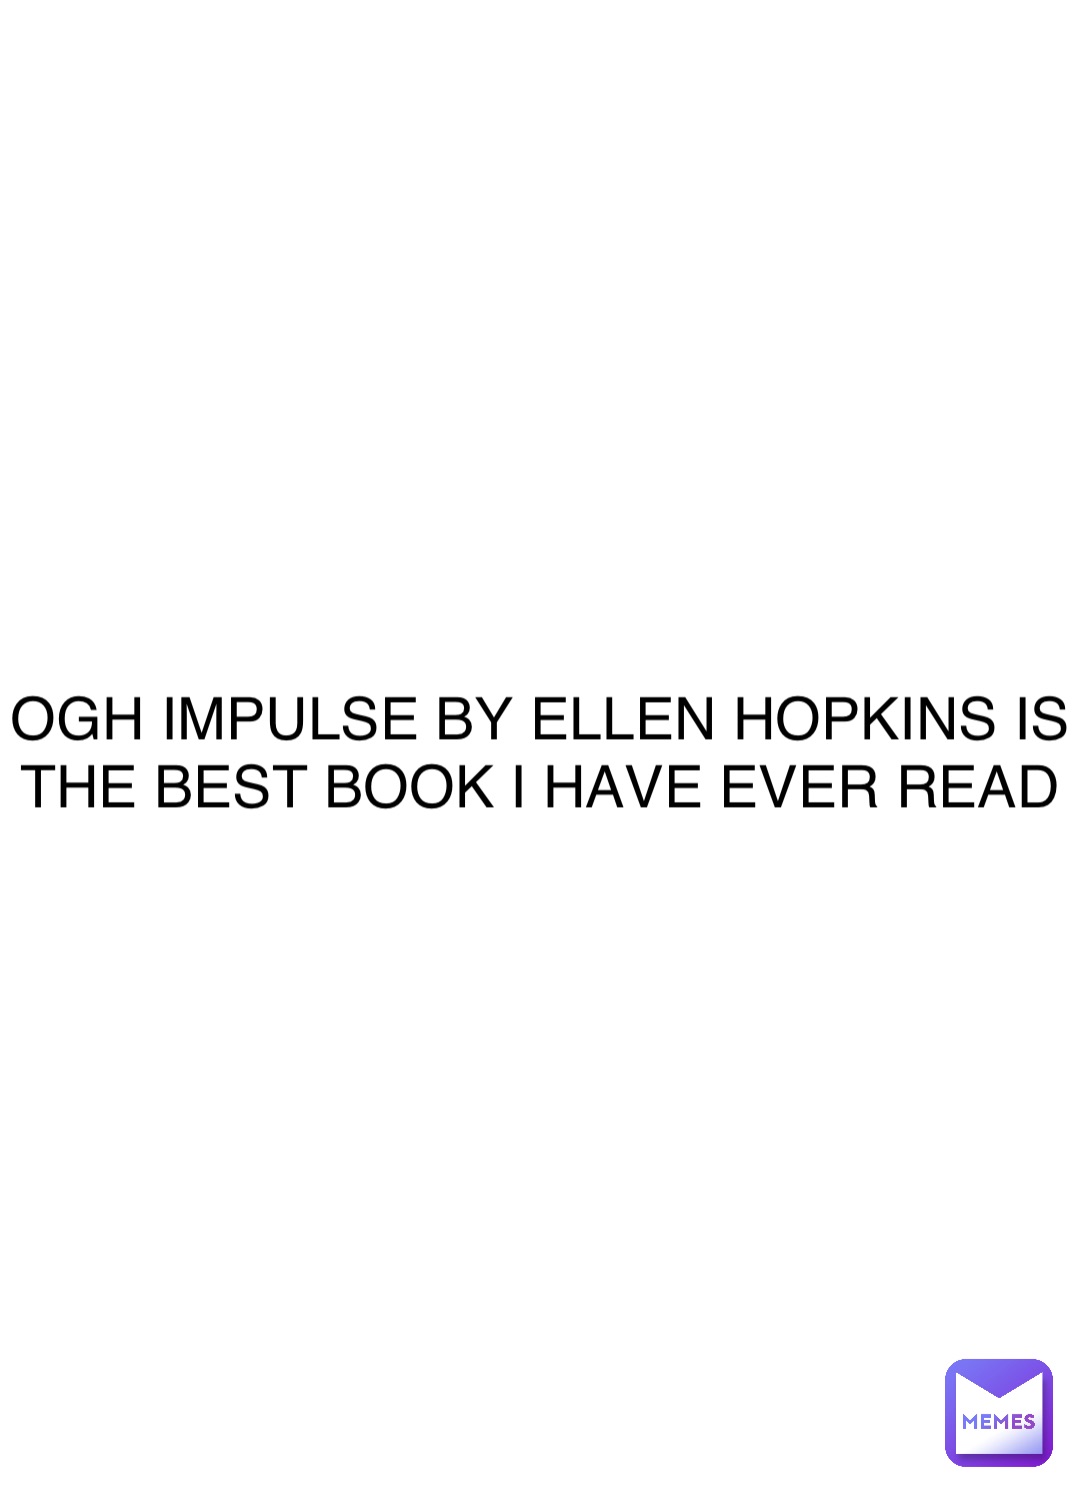 Double tap to edit OGH IMPULSE BY ELLEN HOPKINS IS THE BEST BOOK I HAVE EVER READ